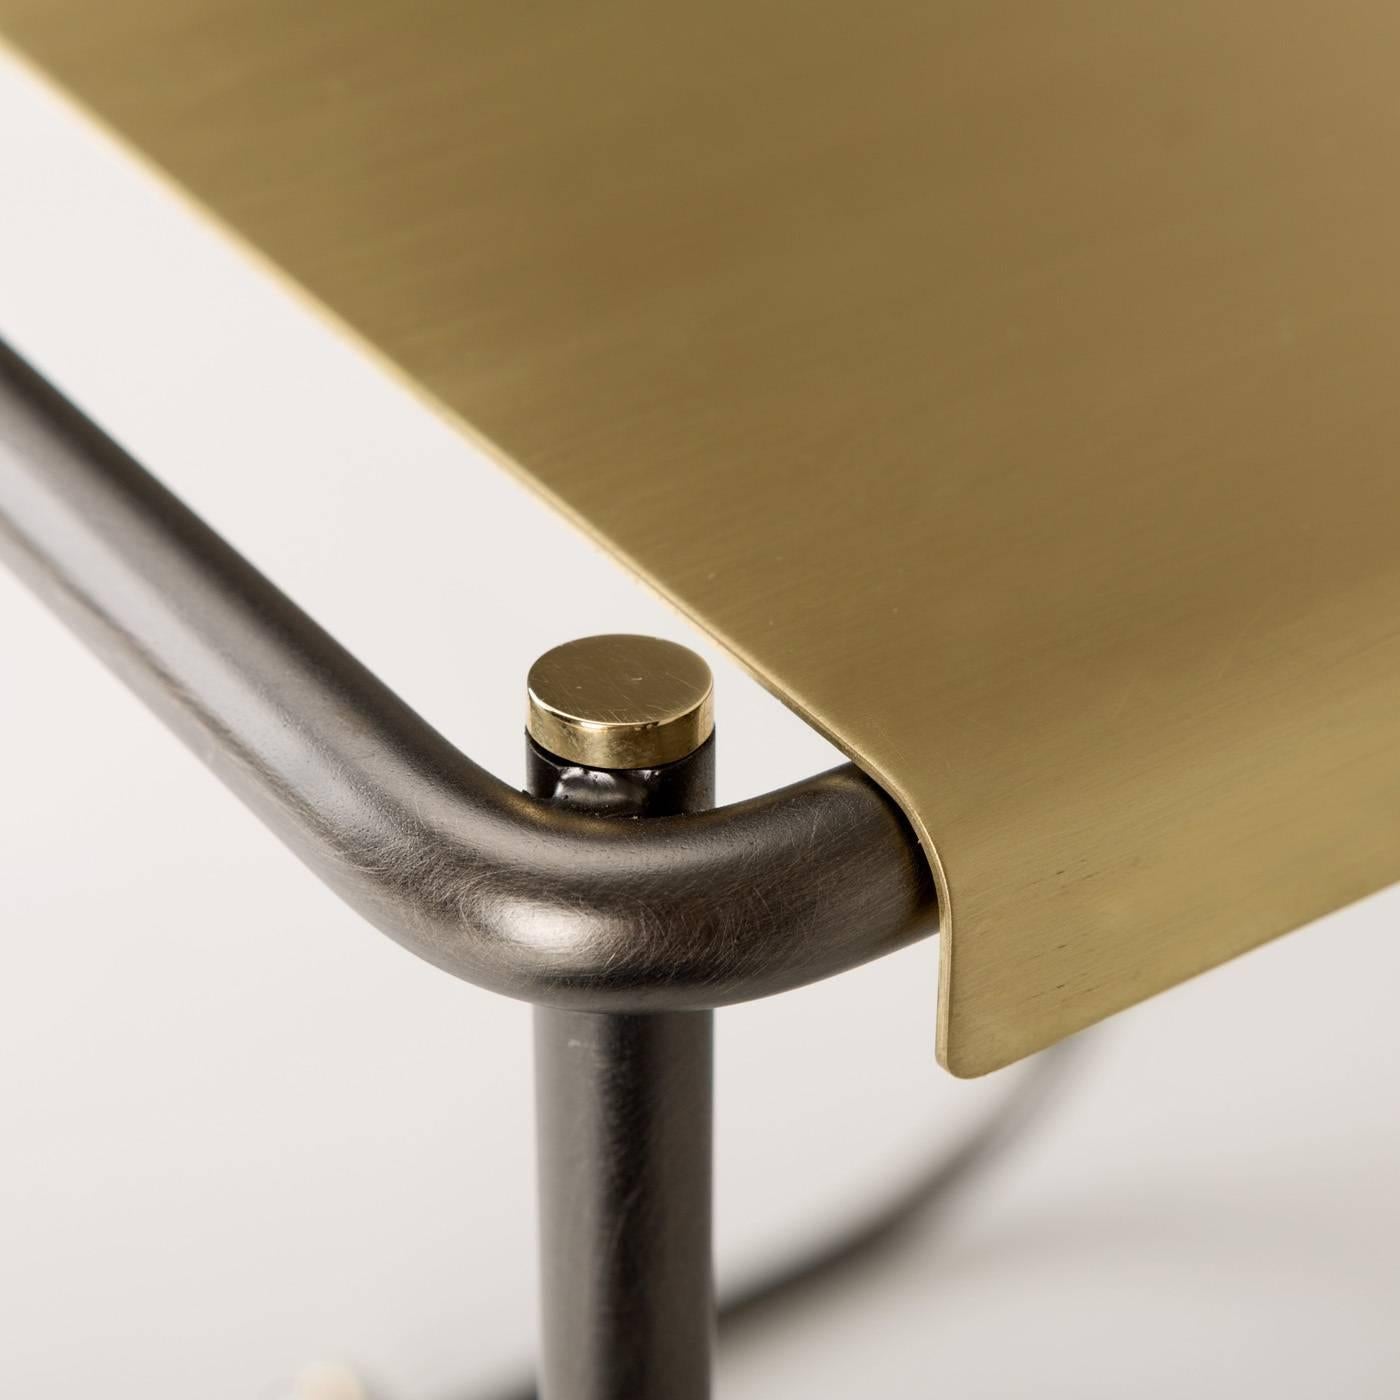 Ilario Innocenti and Giorgio Laboratore designed this contemporary stool made of two bent metal tubes running parallel around the seat and underneath it to support it. The iron structure is complemented with brass screws at the end of the tubes that